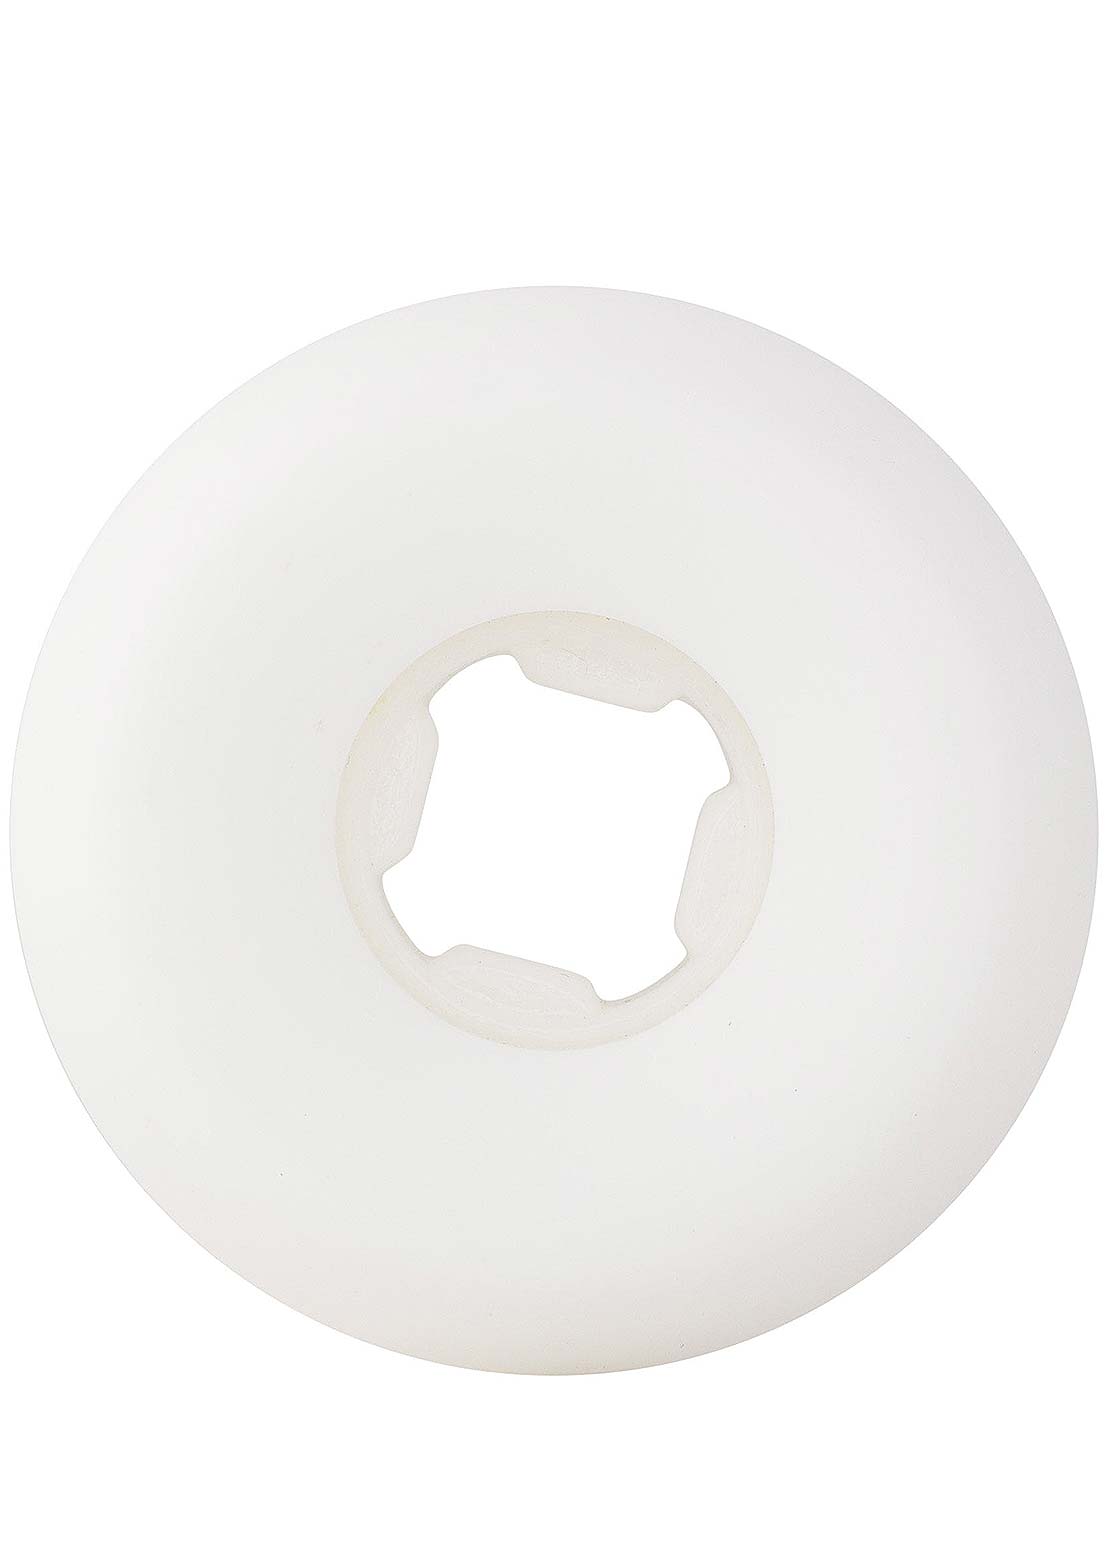 OJ Wheels From Concentrate 101A Skateboard Wheels 53 mm White